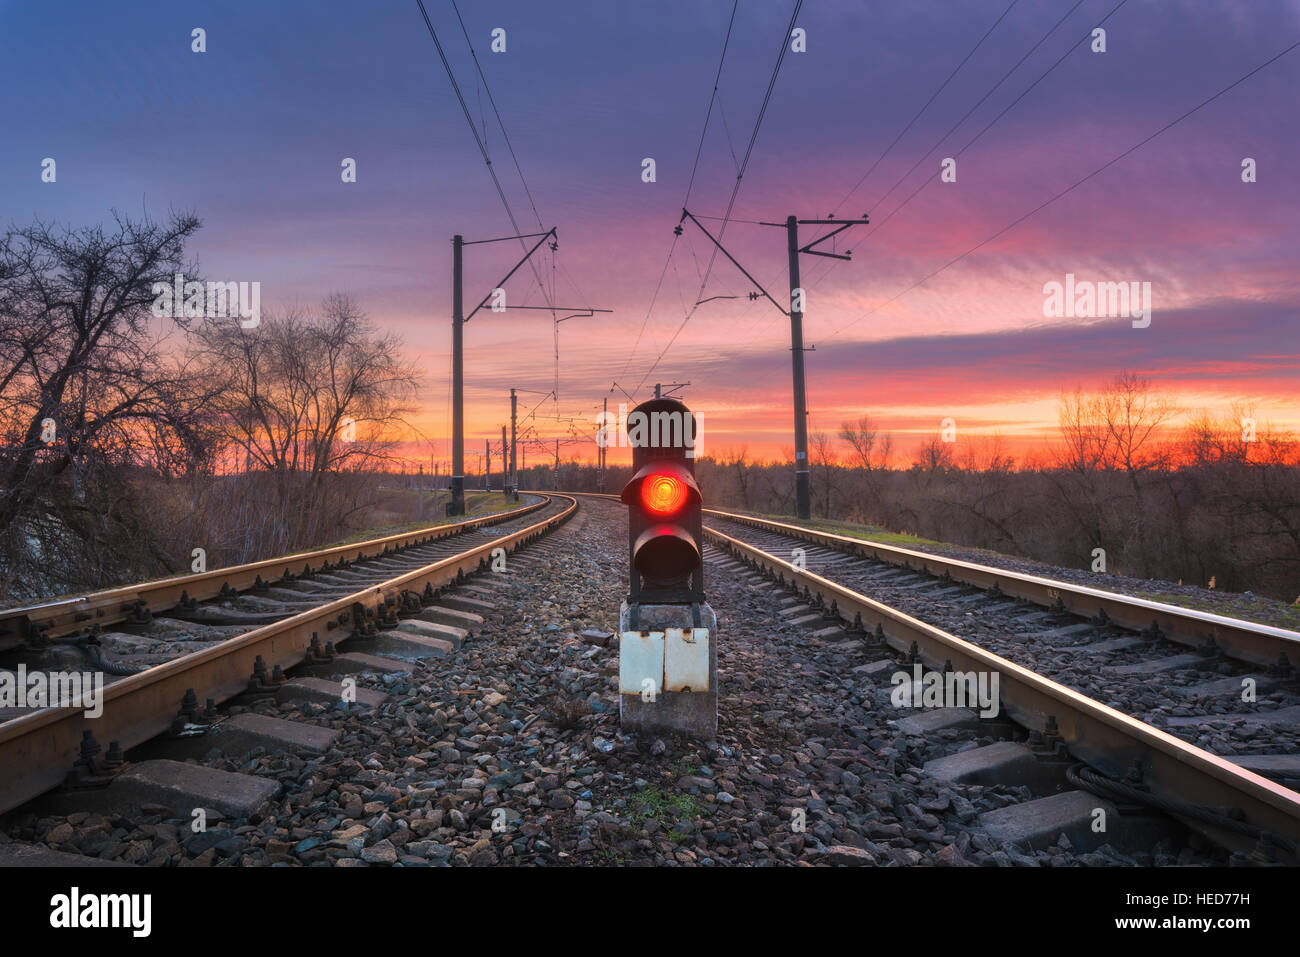 Railway station with semaphore against beautiful sky with clouds at sunset. Colorful industrial landscape. Railroad Stock Photo